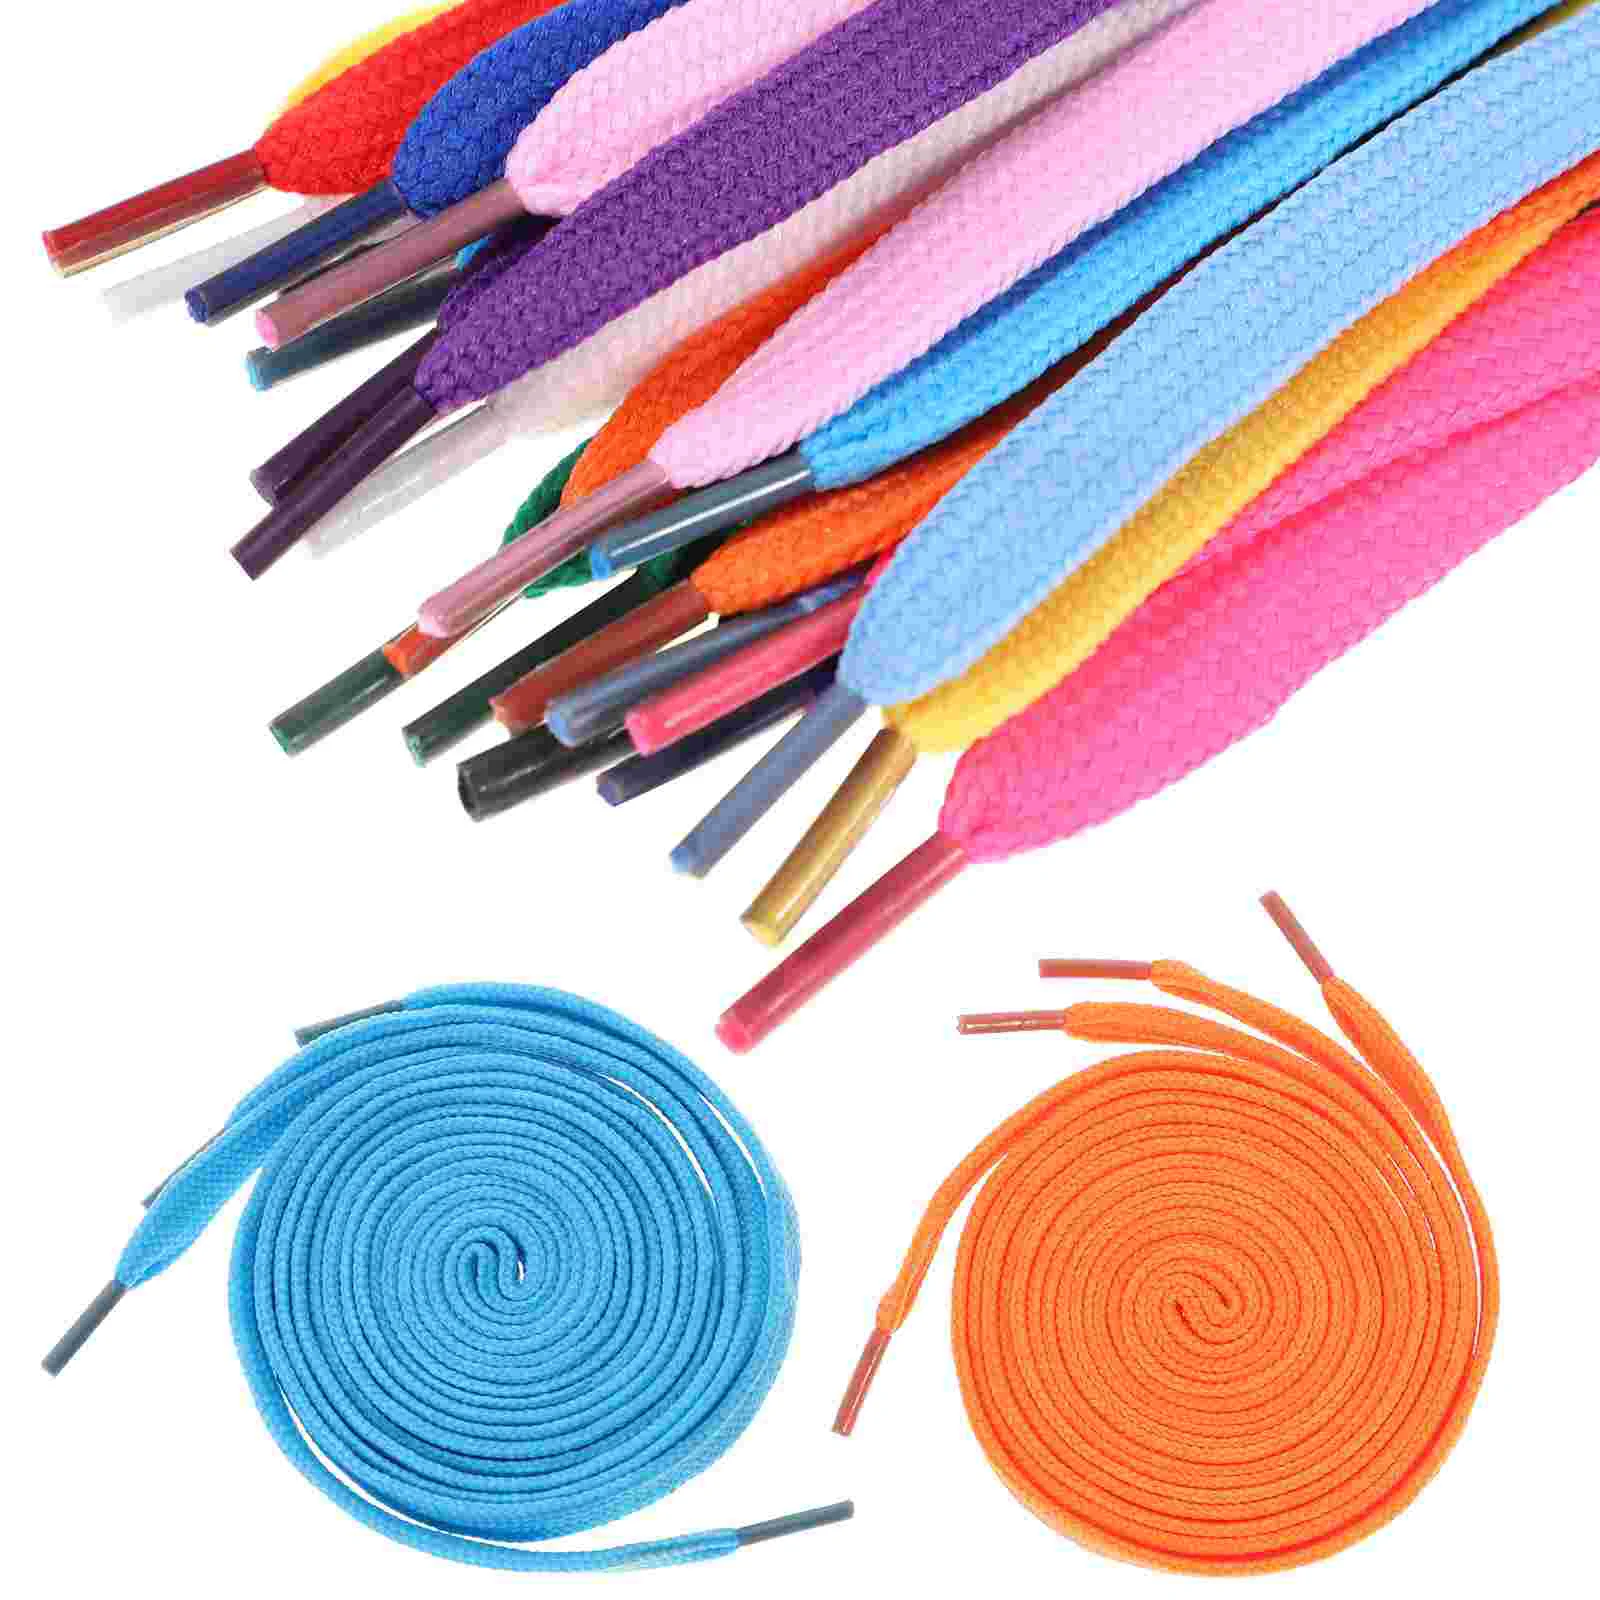 of Replacement Flat Shoelaces Shoe Laces Strings for Sports Shoes /Boots /Sneakers /Skates (Assorted Colors) 1pair sneakers shoelaces shoes accessories laces for shoes unisex flat shoe laces shoe strings shoelaces af1length100，120 140cm